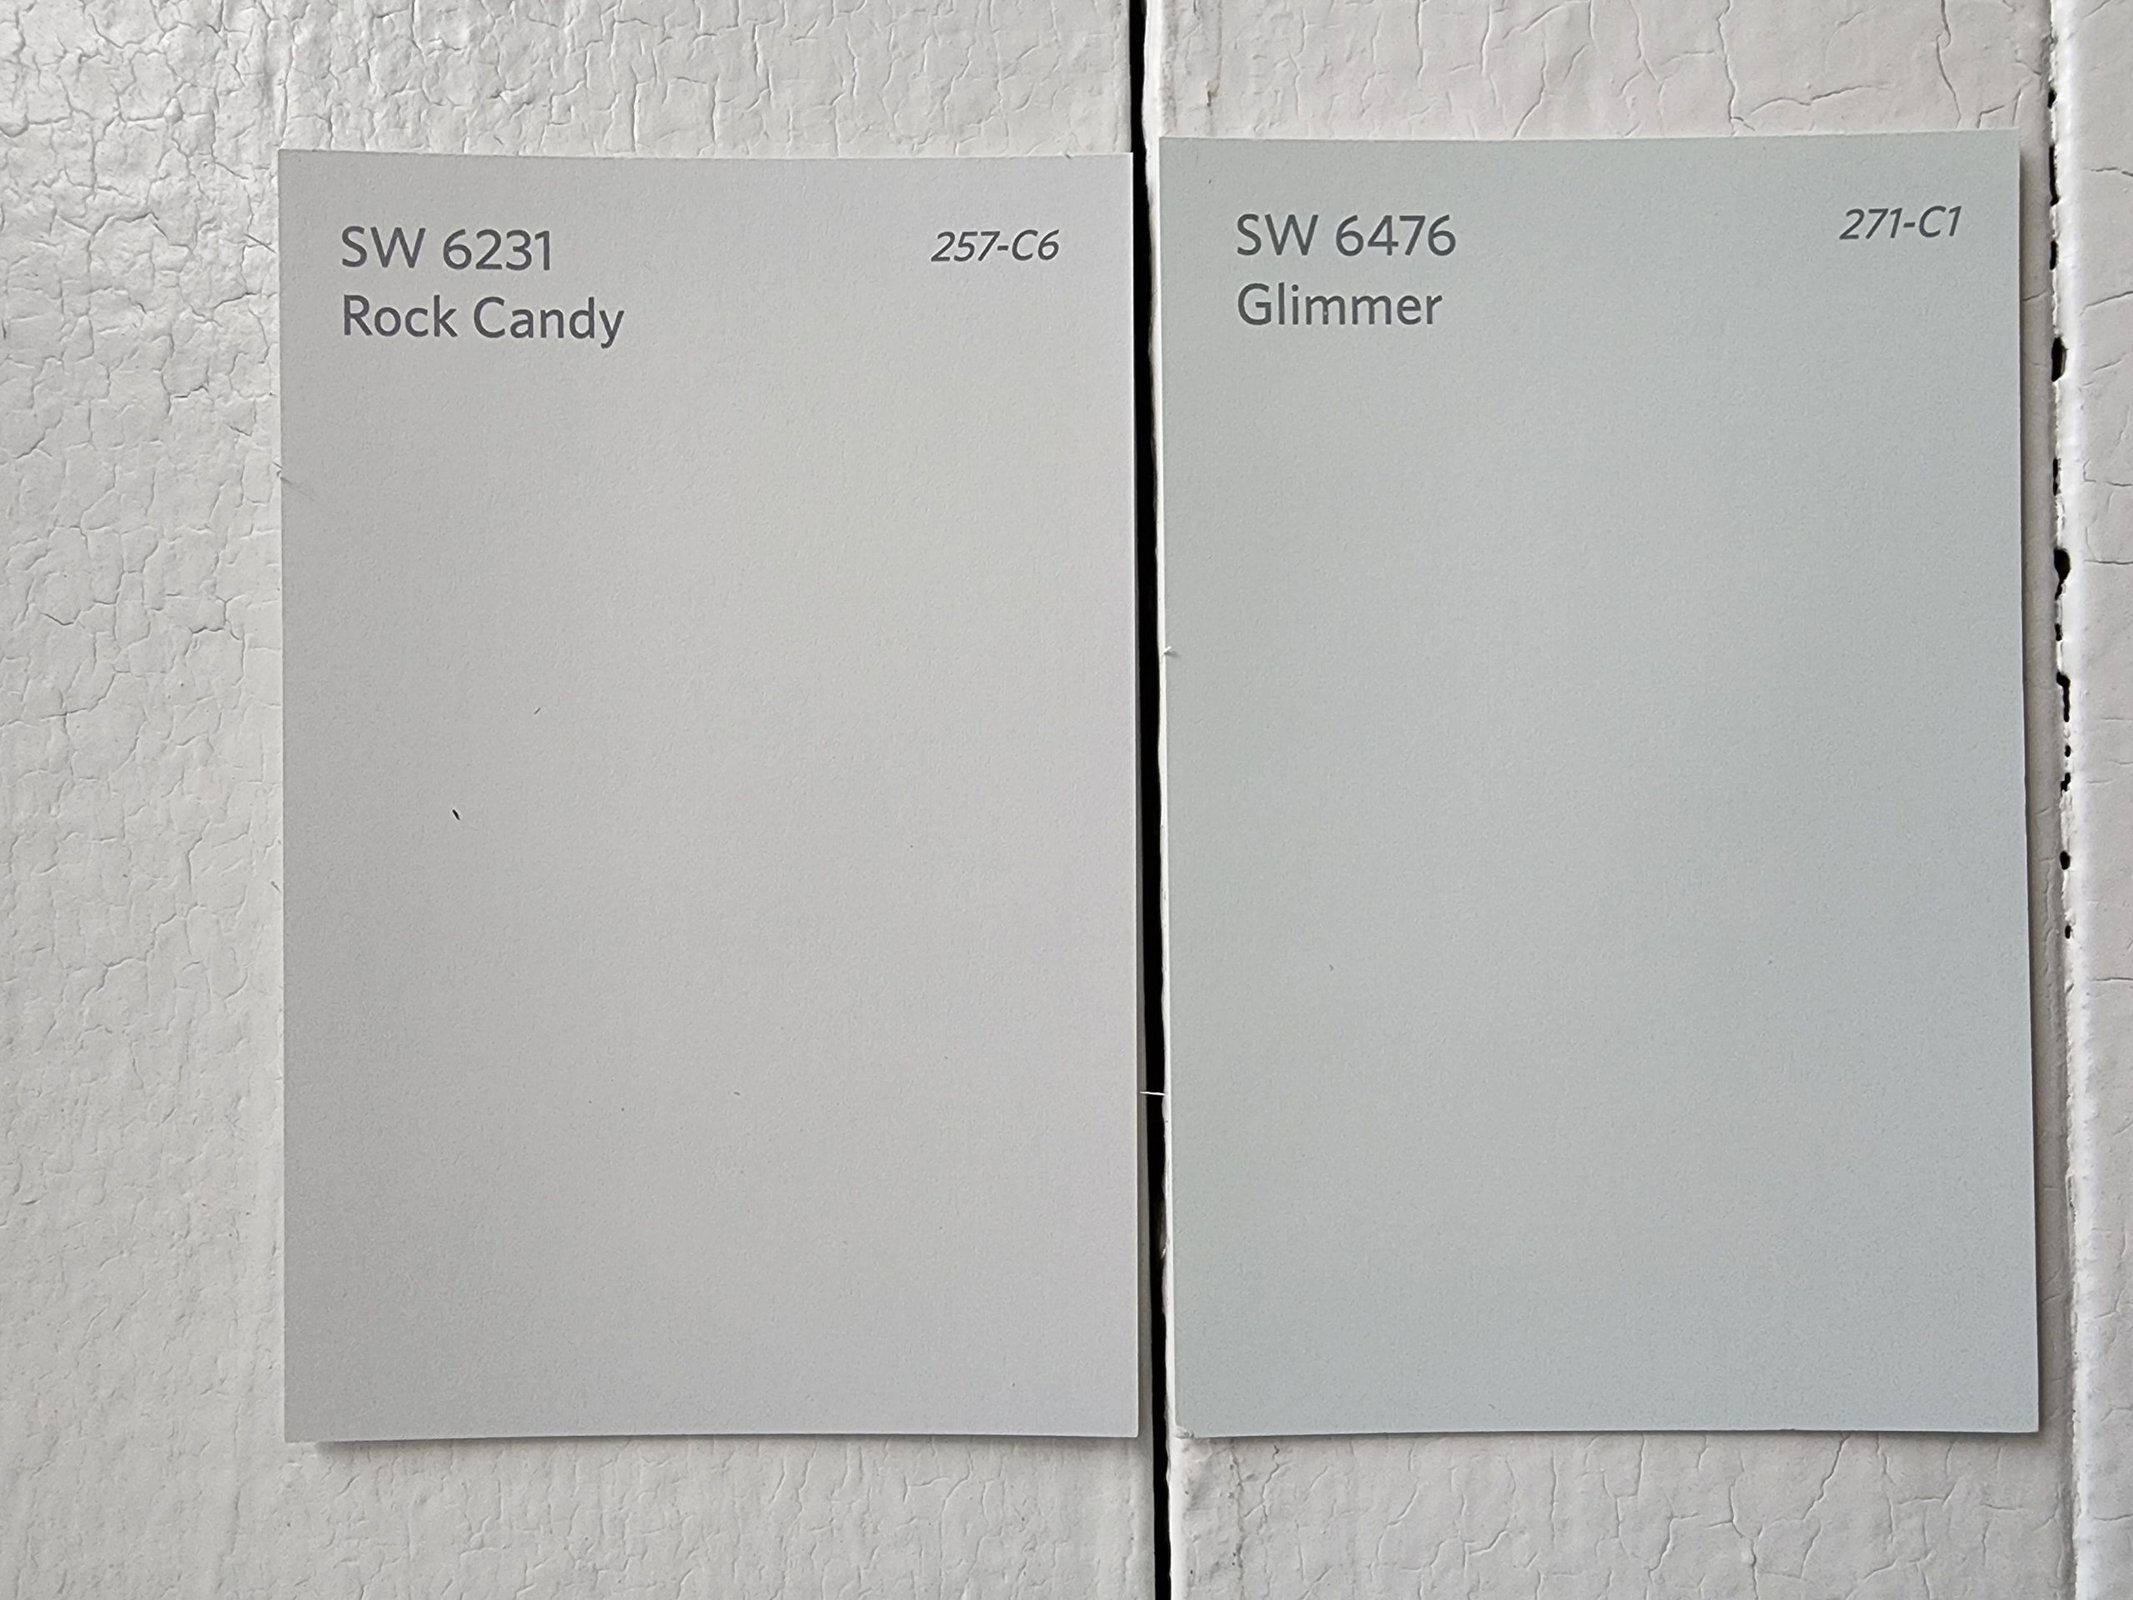  Rock Candy vs Glimmer by Sherwin Williams scaled